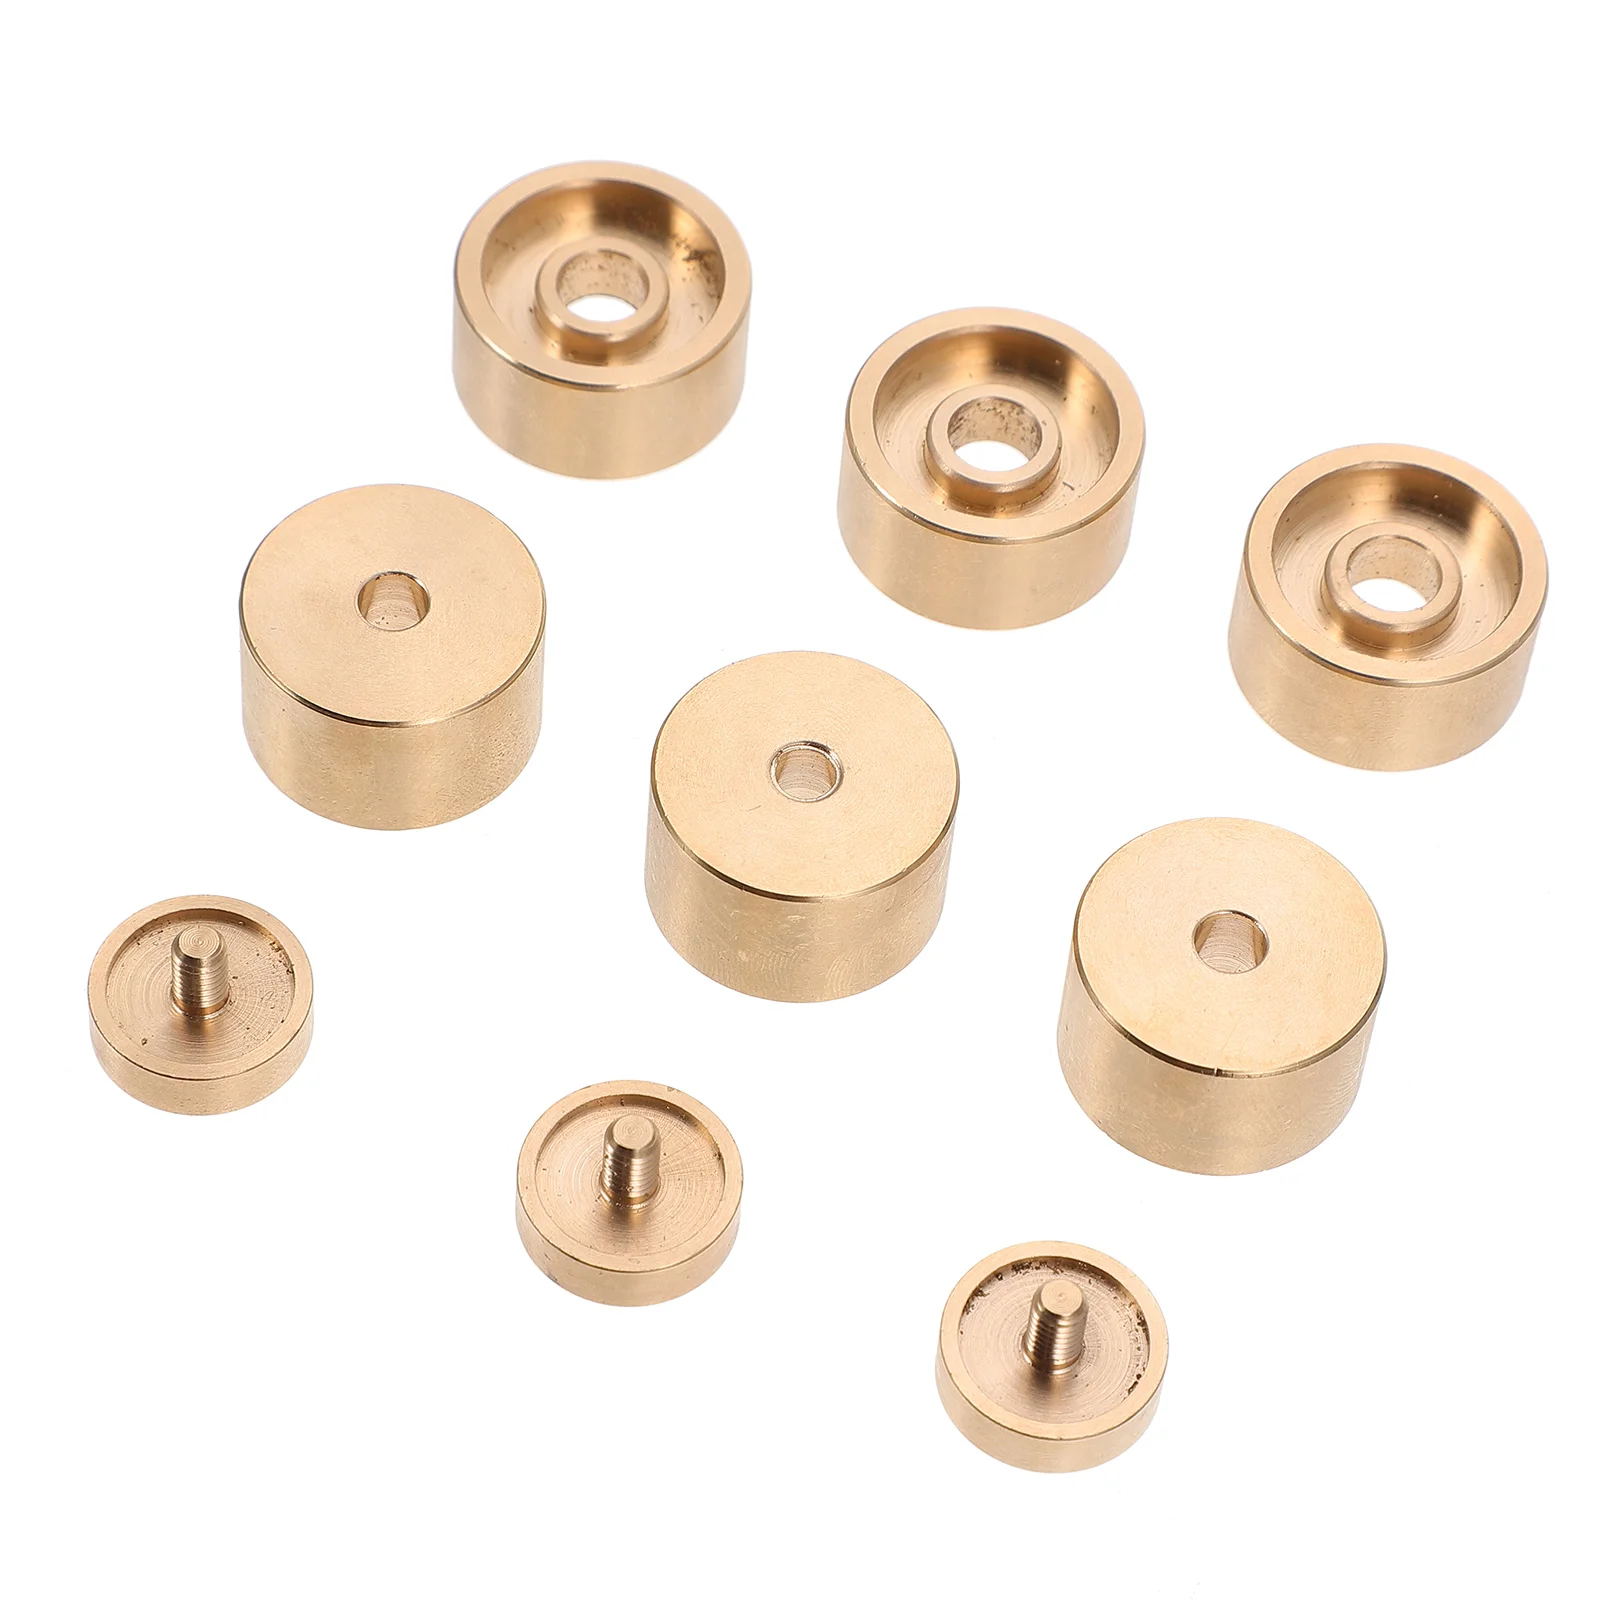 

Small Upper Lower Cover Useful Musical Instrument Tool Snap Fastener Finger Buttons Copper Trumpet Piston Mini Accessories